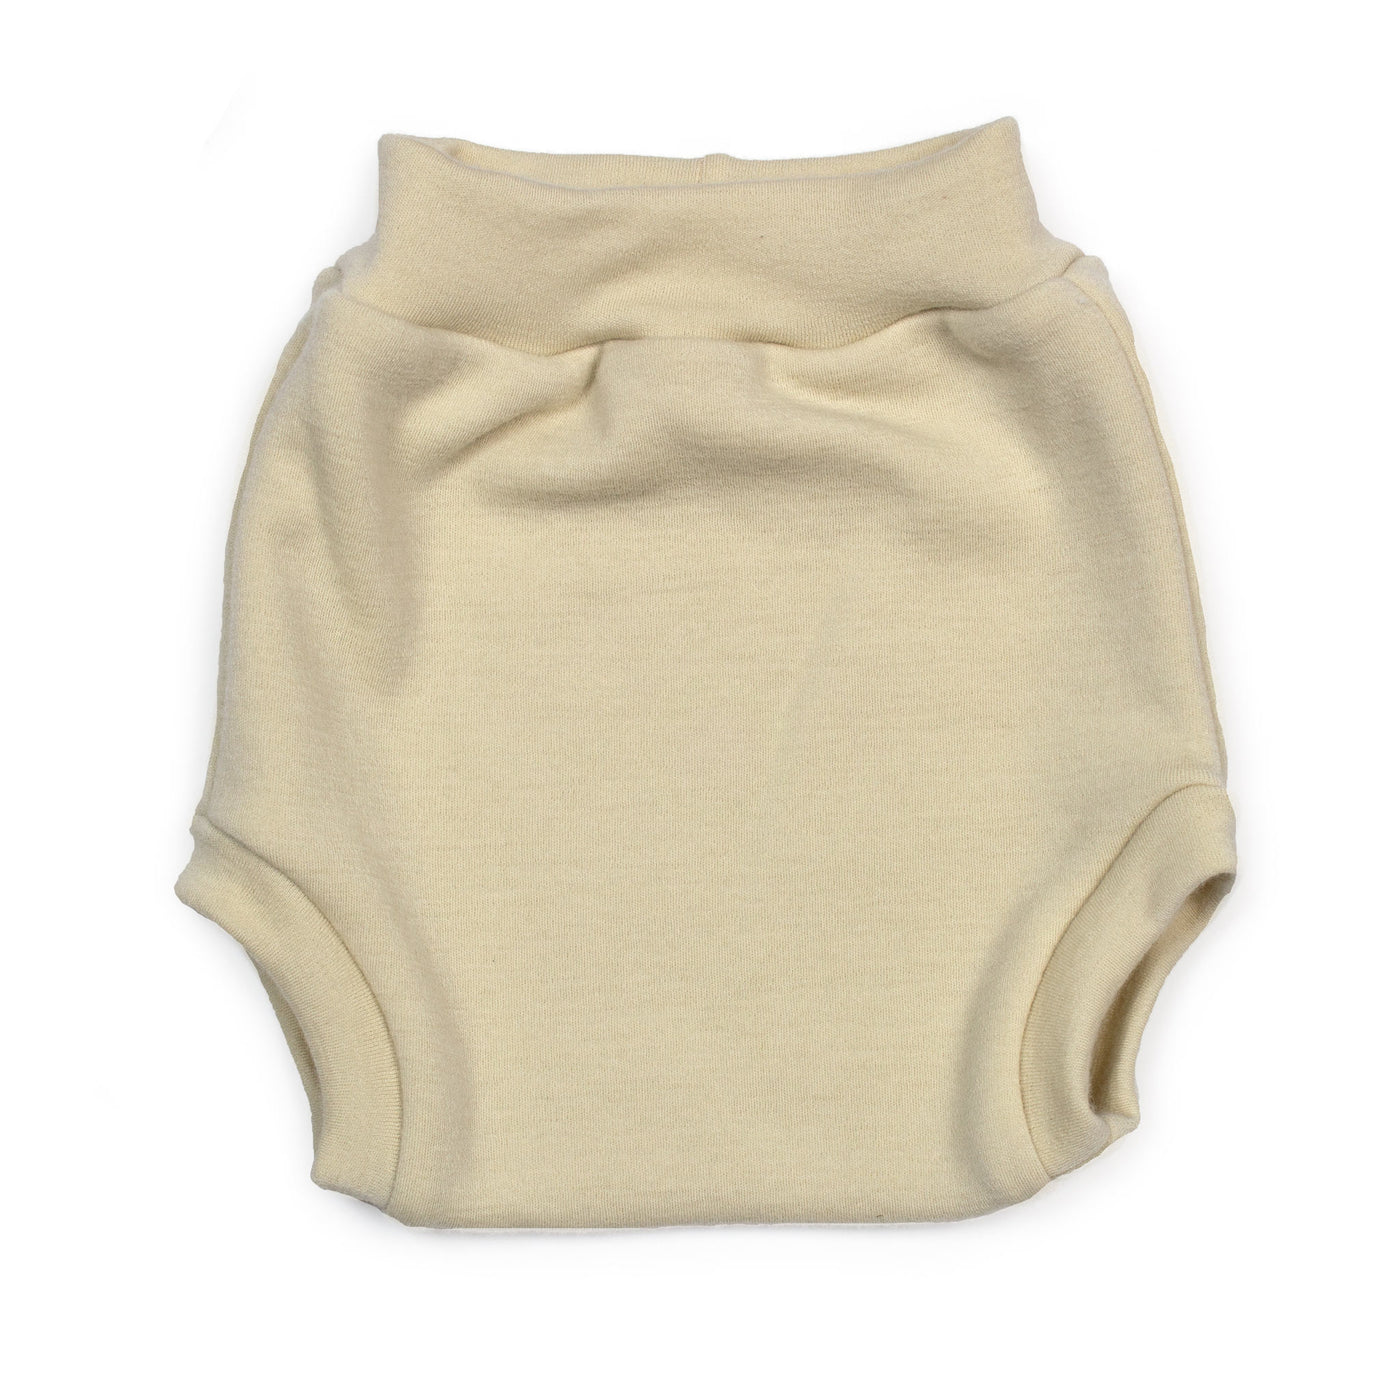 Babee Greens wool pull-on diaper cover XLarge